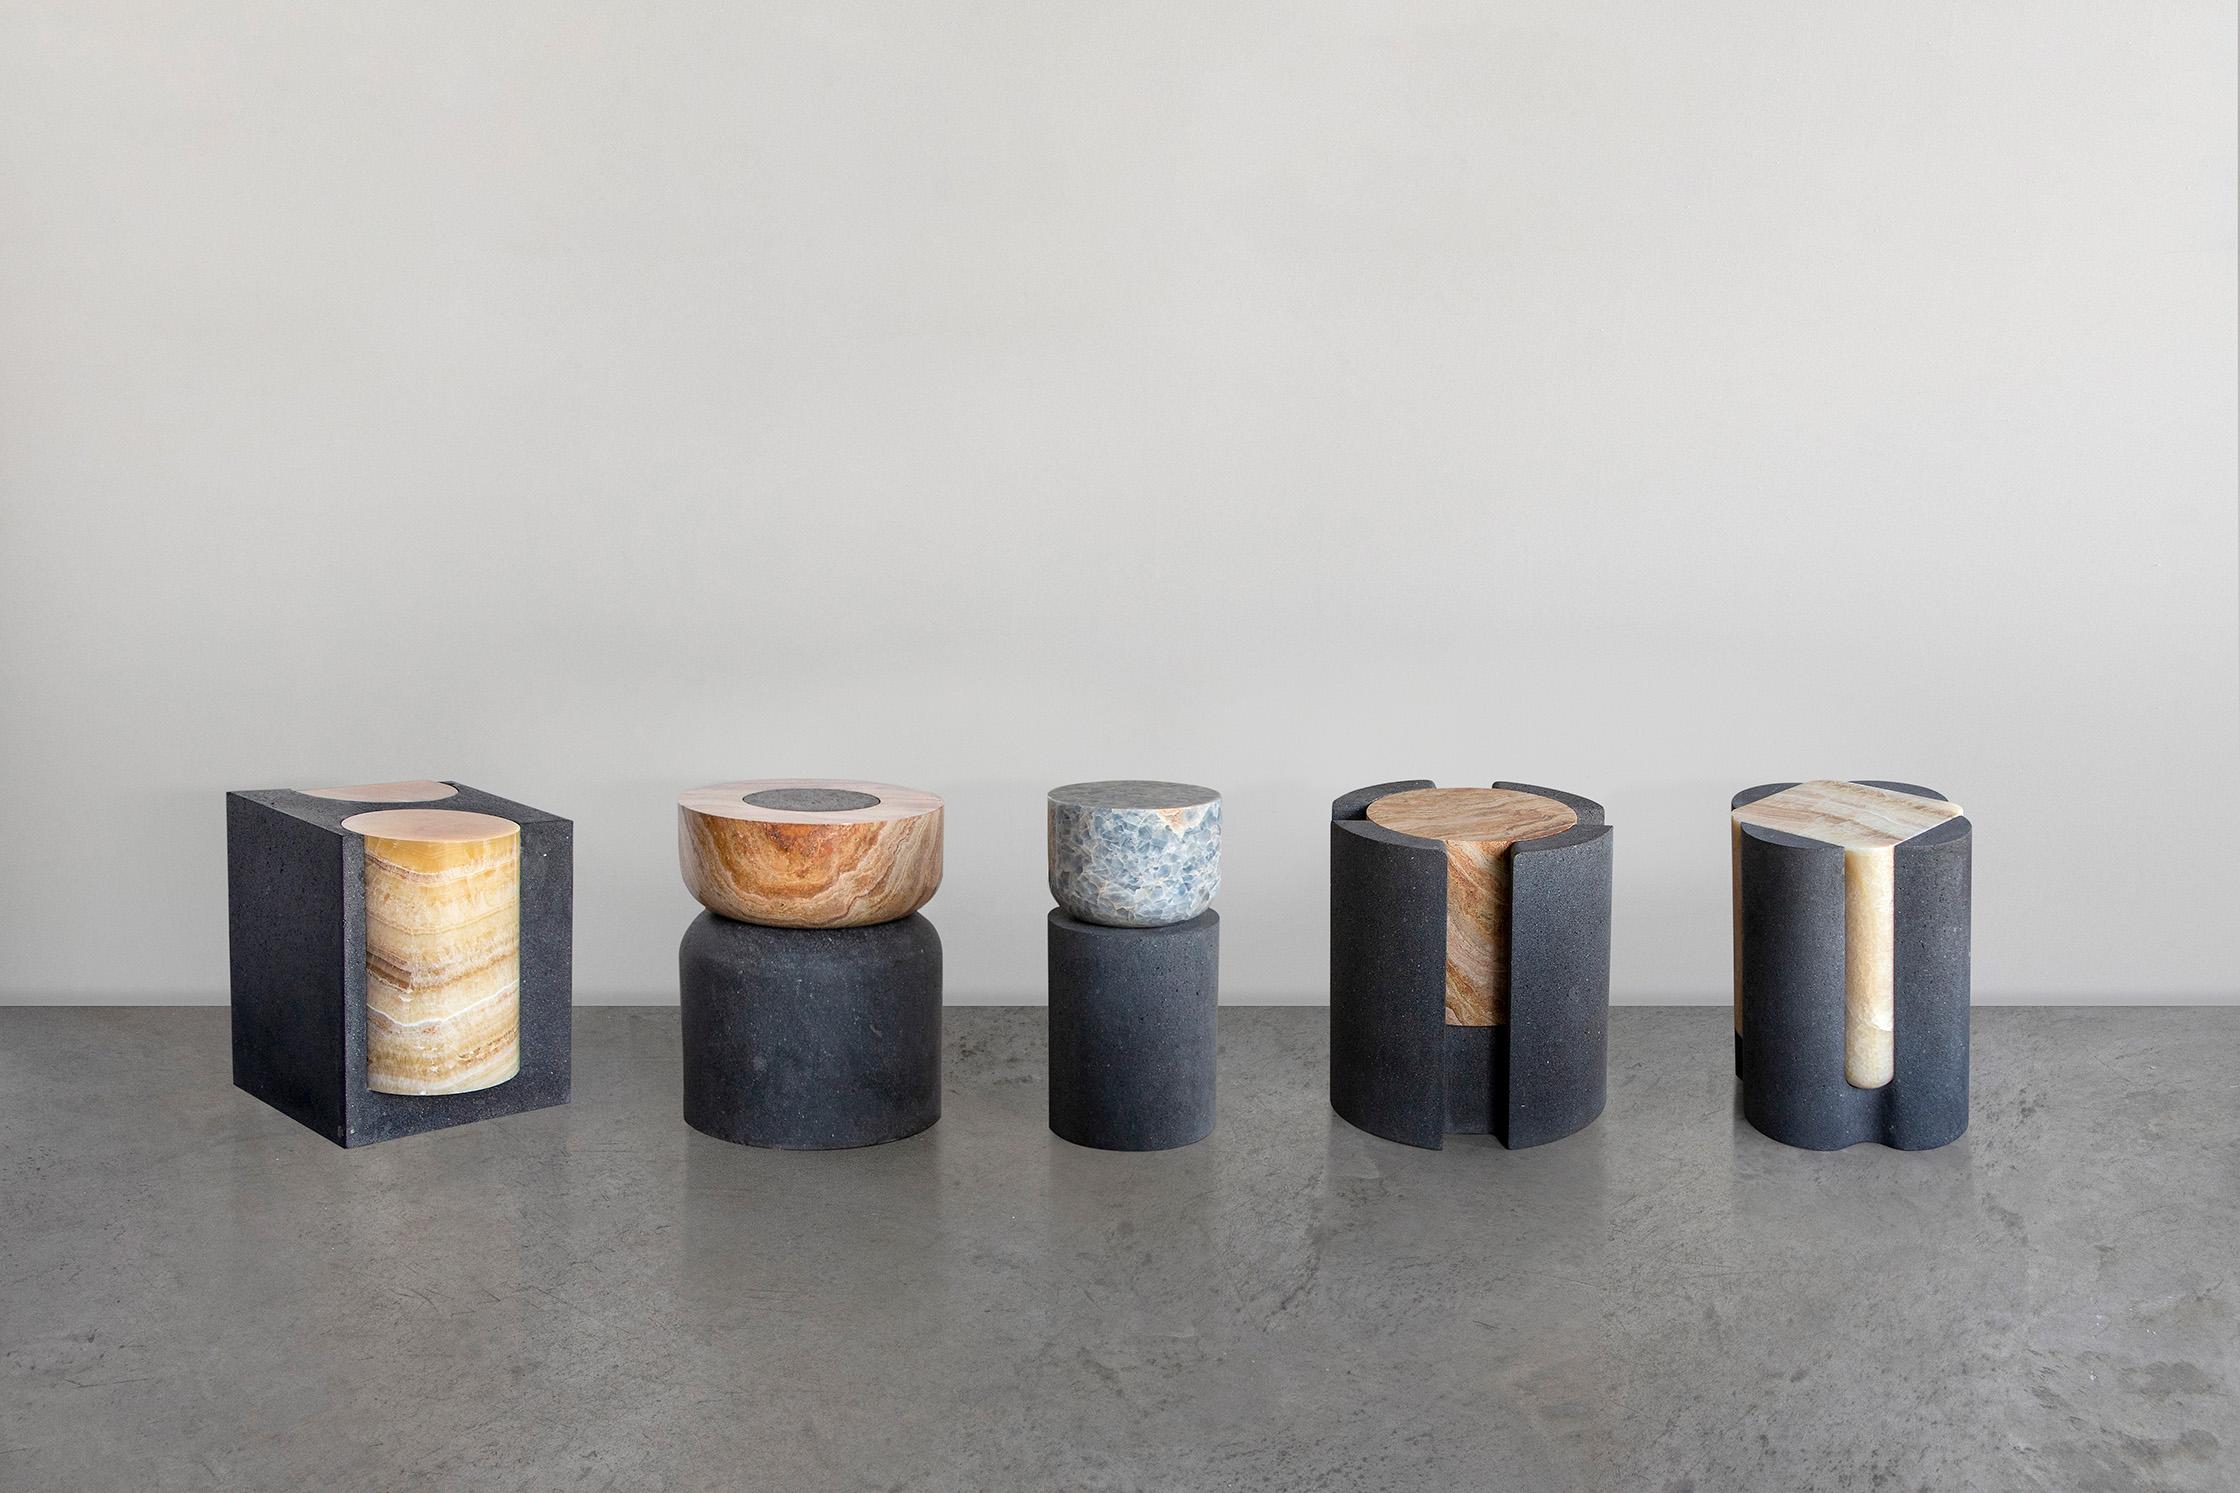 Volcanic Shade V Stool/Table by Sten Studio, Represented by Tuleste Factory 2